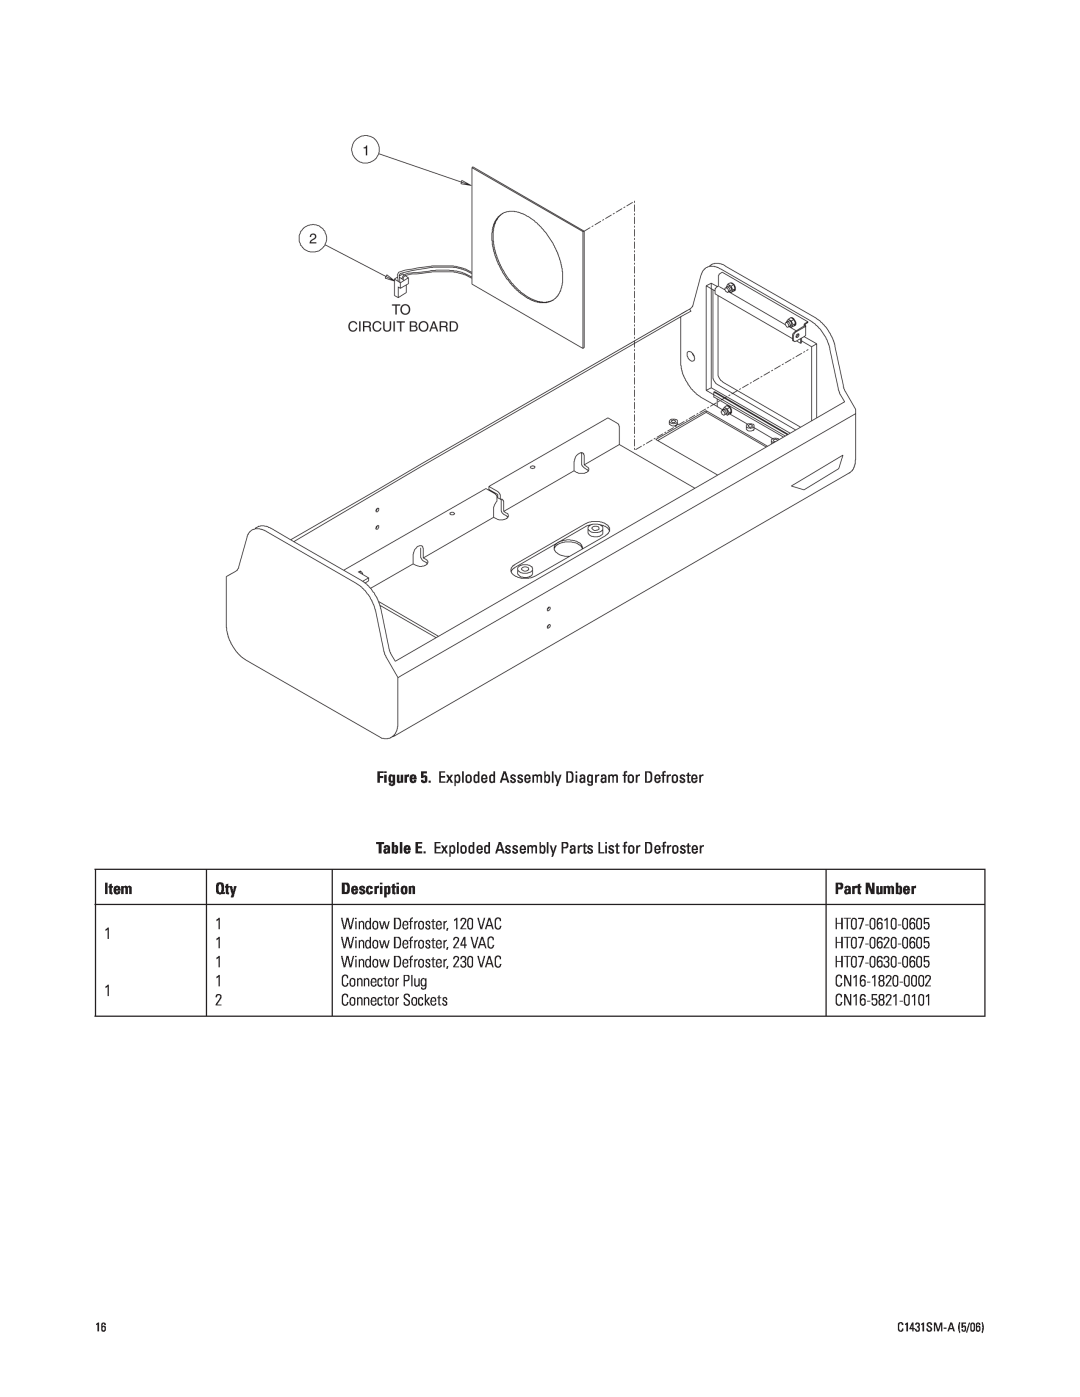 Pelco EH5700 Series manual Exploded Assembly Diagram for Defroster, Description, Part Number 